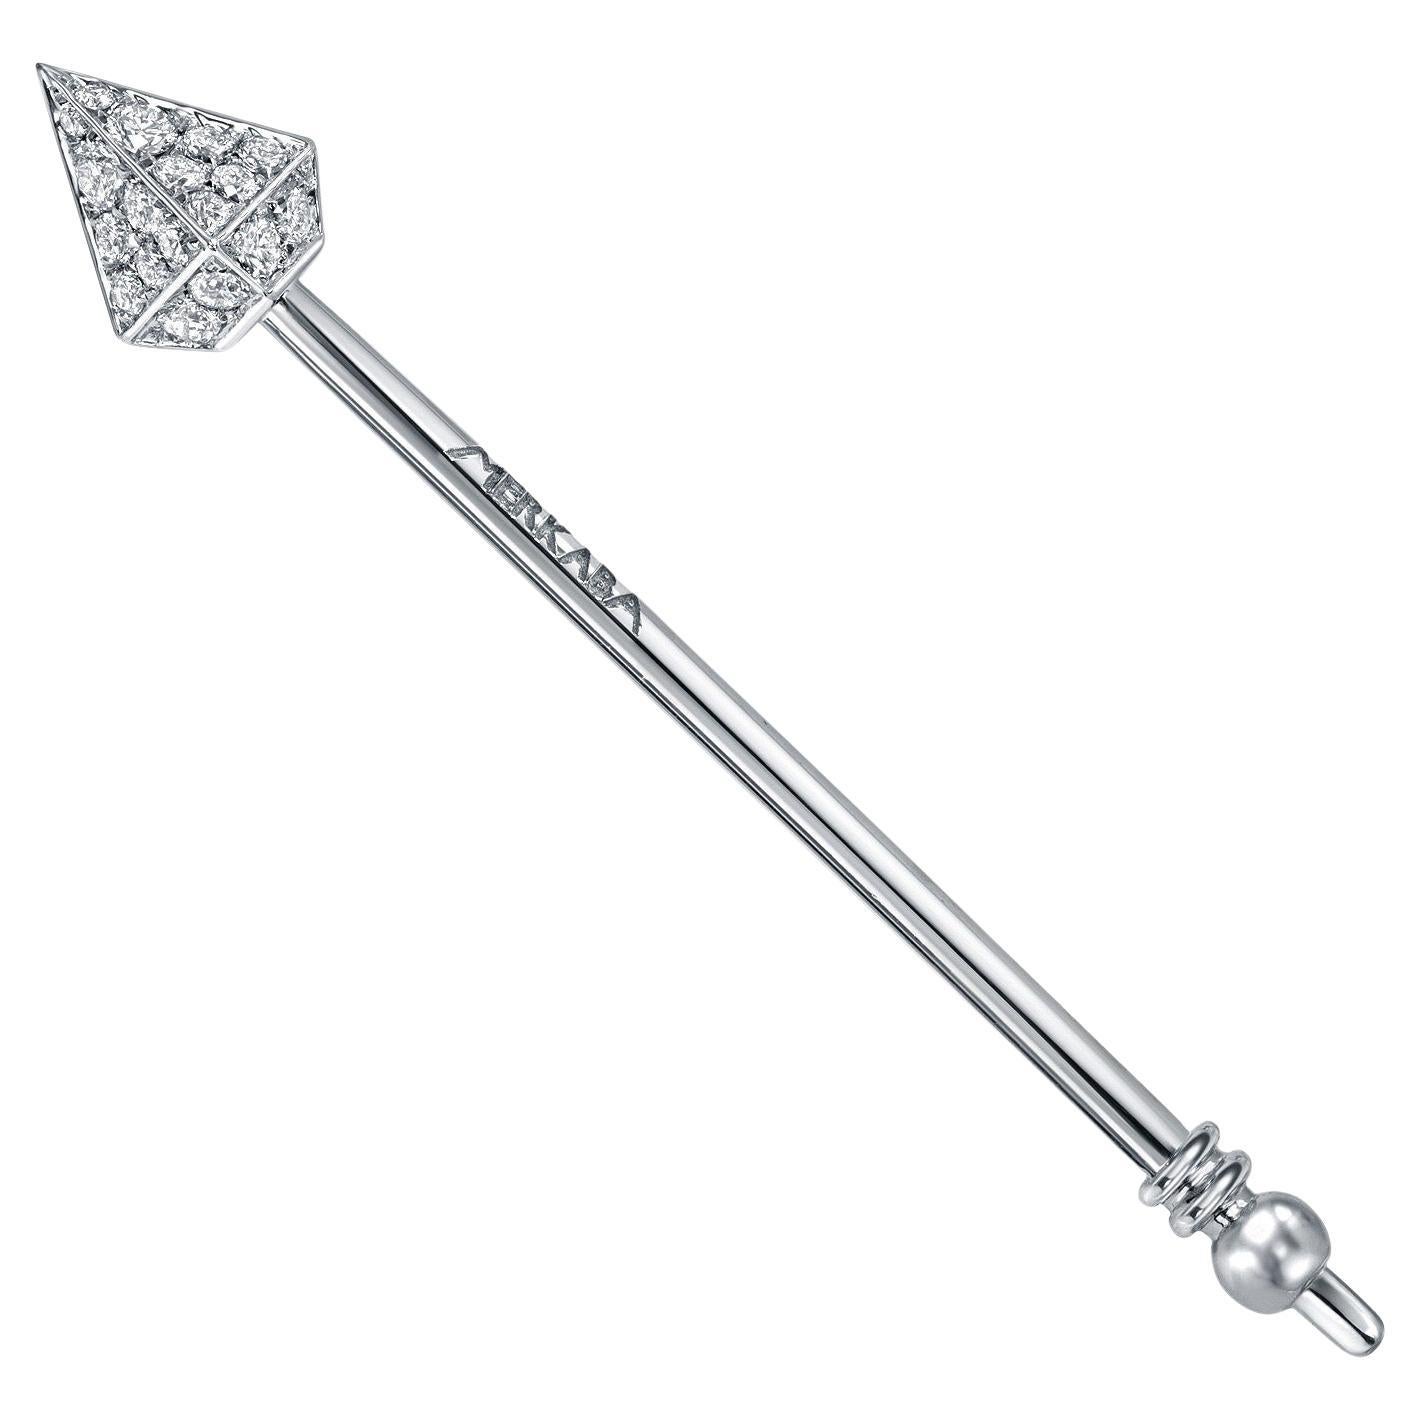 Very unique and stylish diamond spear hat pin, created by Merkaba Jewelry in 18K white gold. The round brilliant diamonds weigh a total of 0.50 carats. 
Total length - 1.75